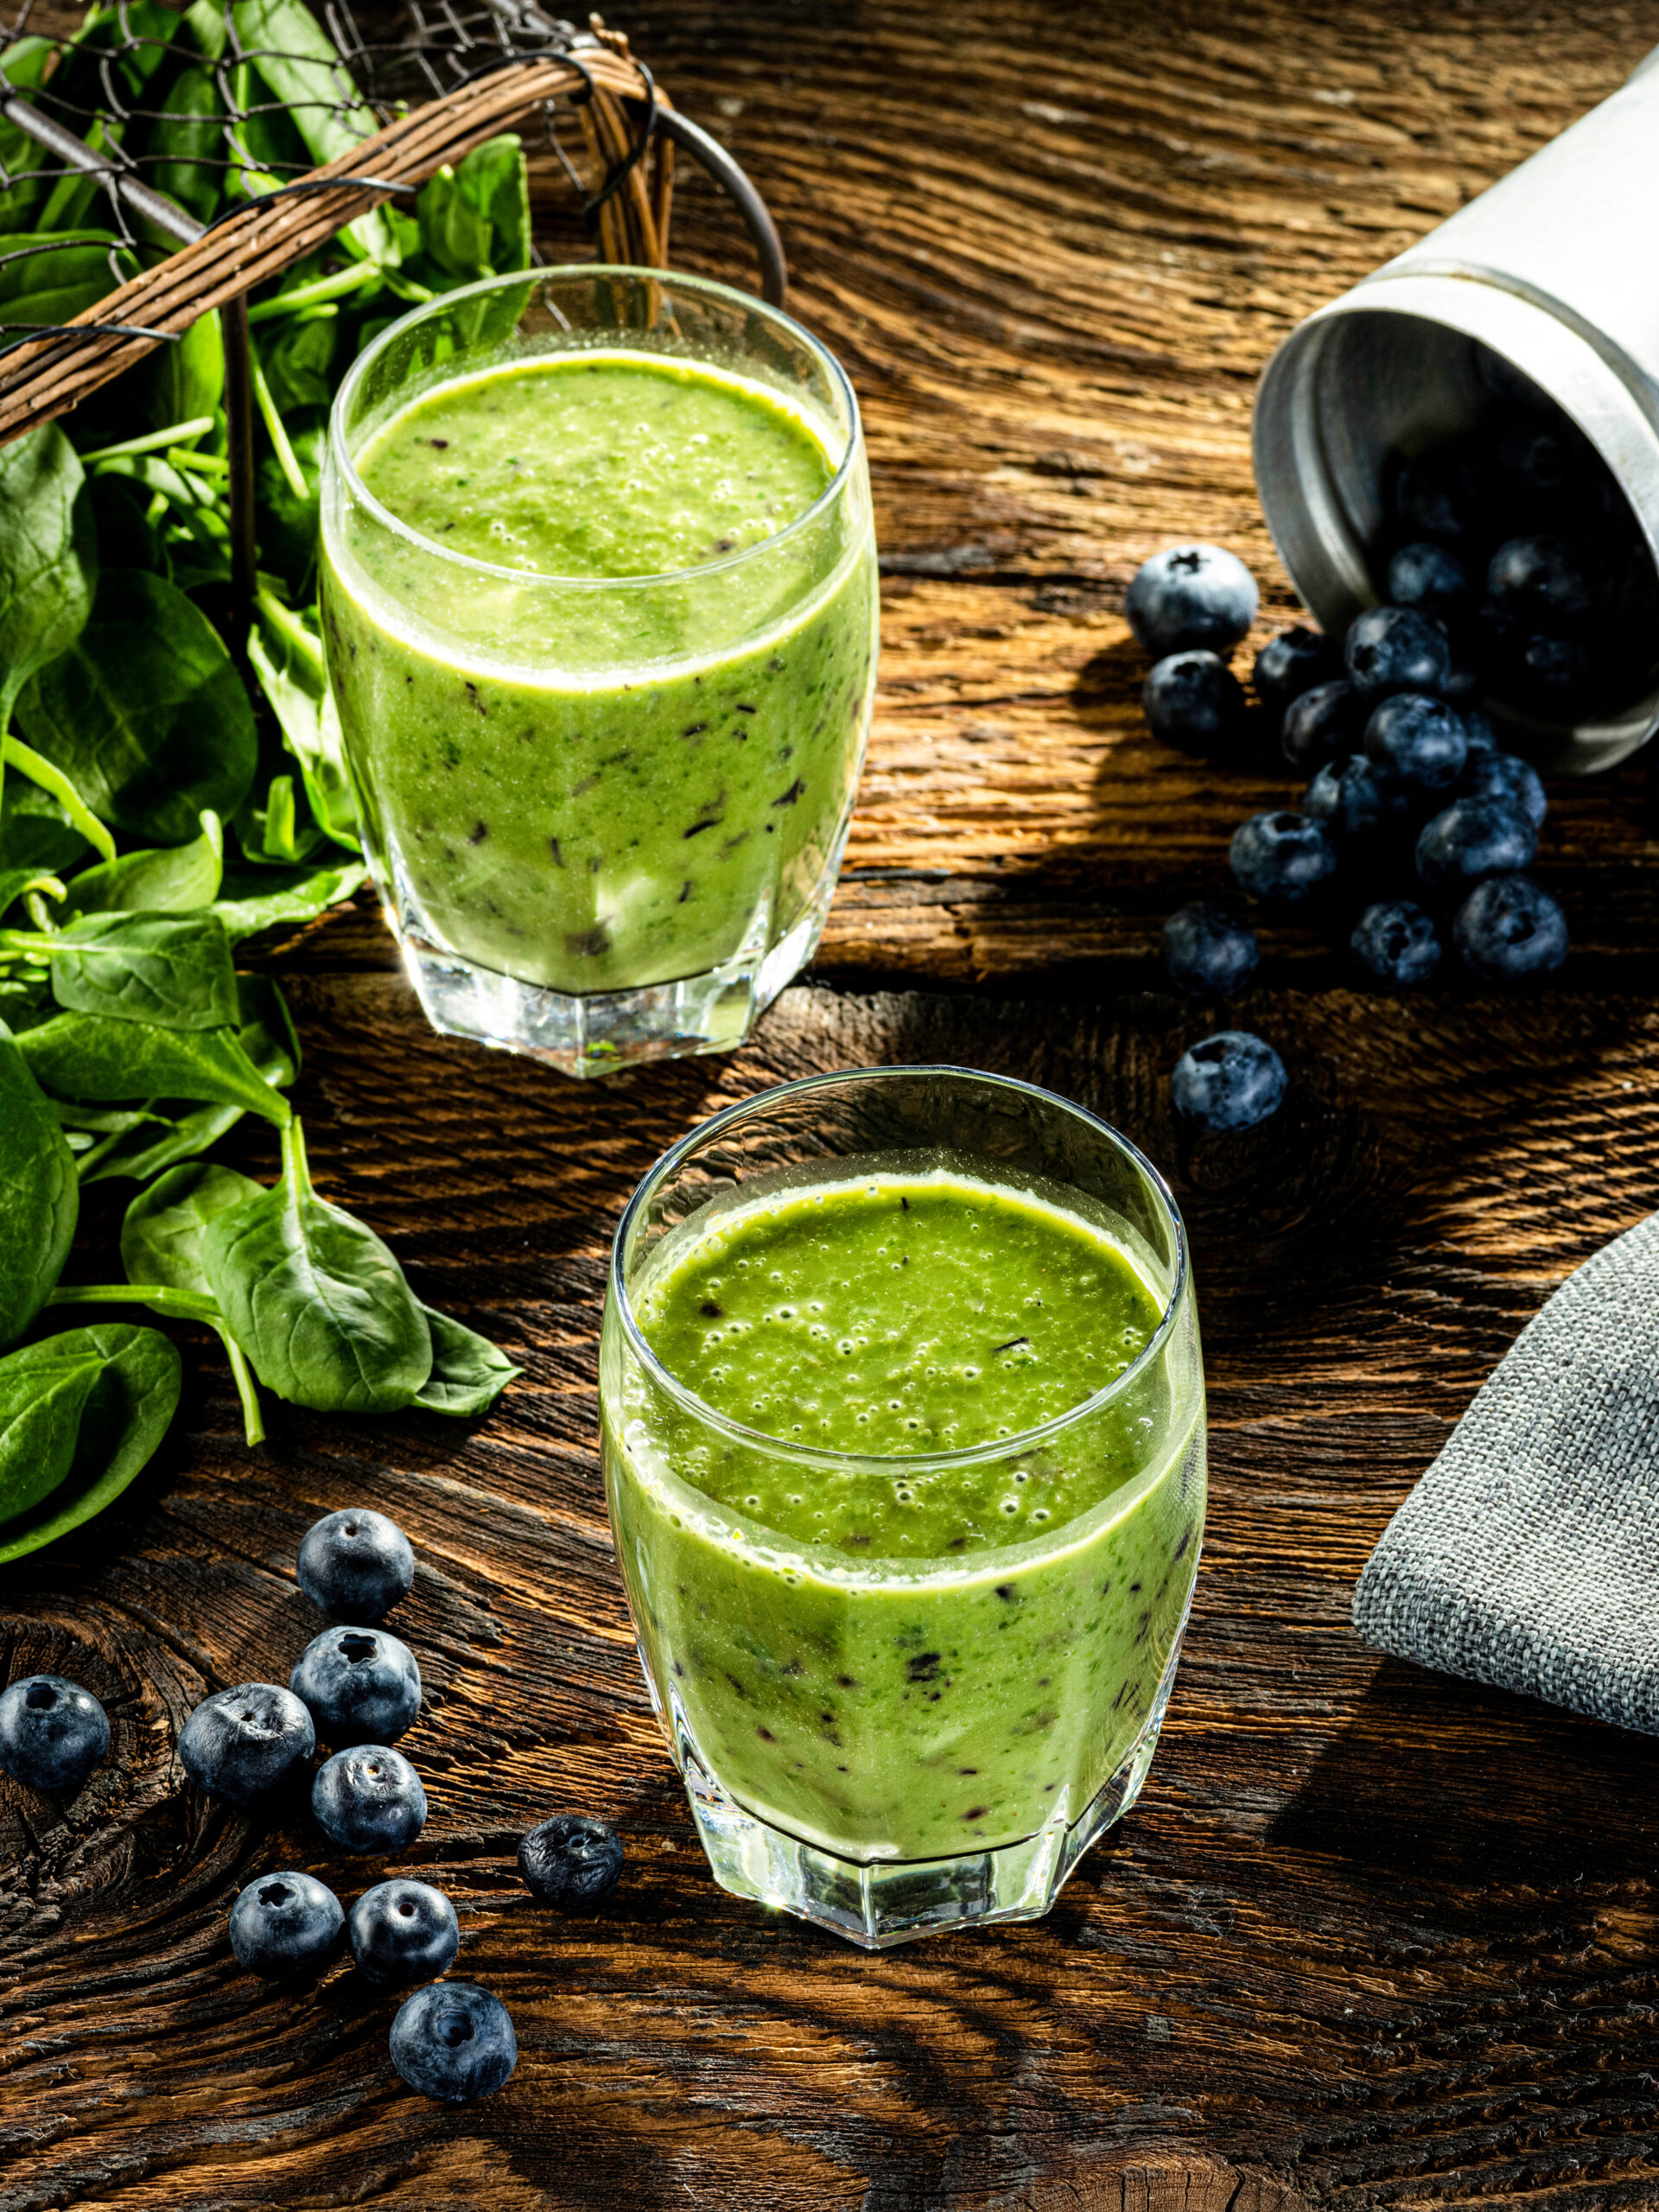 Blueberry and Greens Smoothie